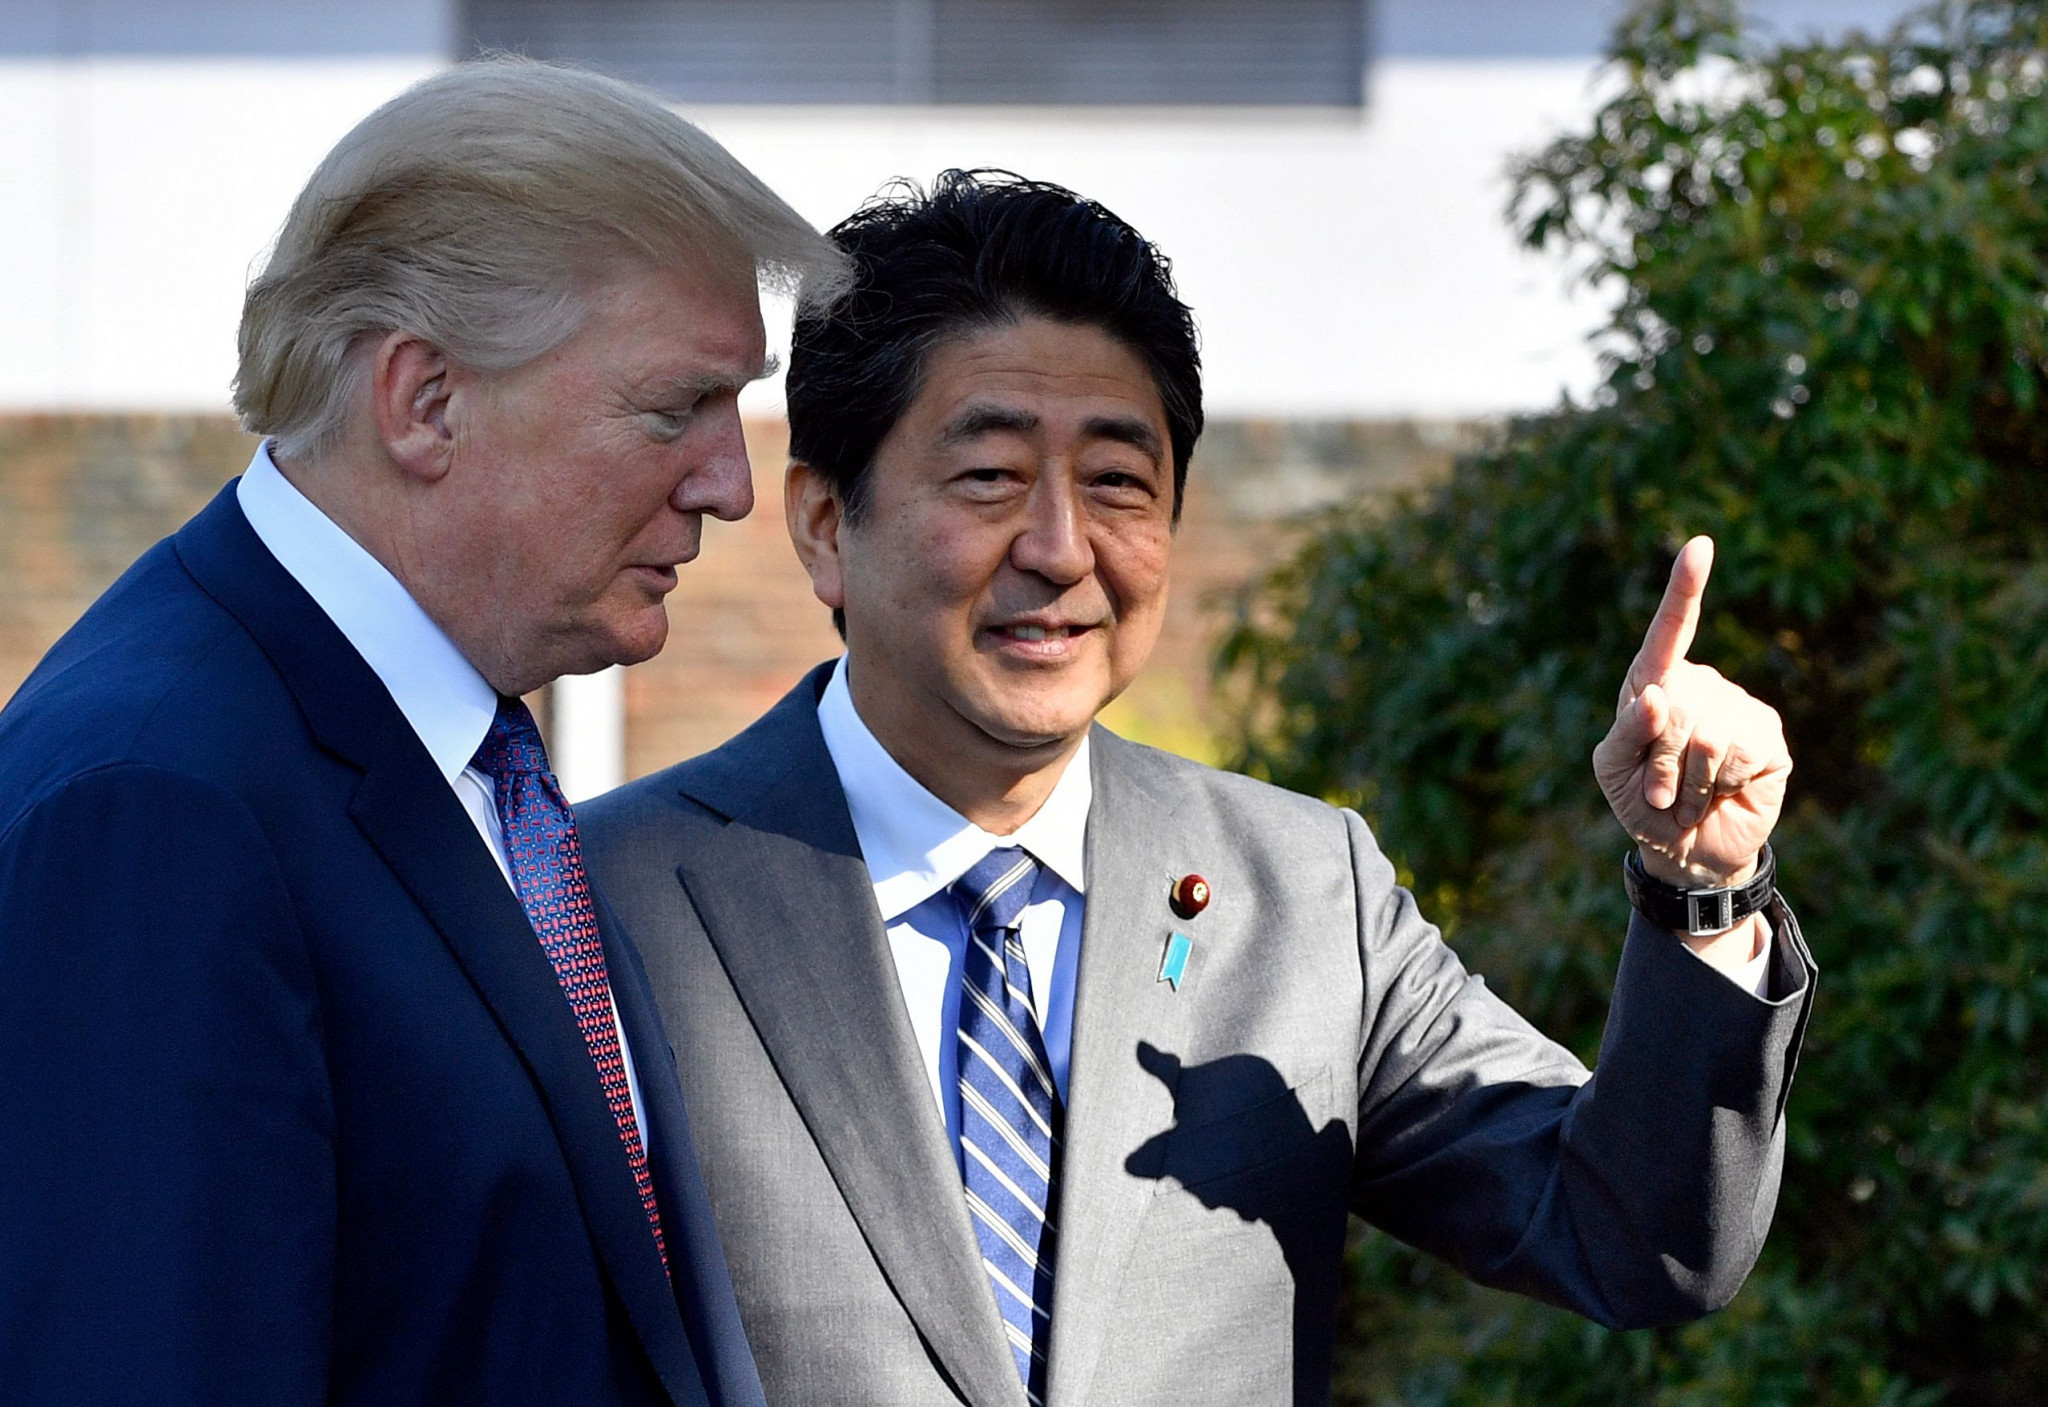 In November 2017, United States President Donald Trump and Japanese Prime Minister Shinzō Abe played a round of golf at the Kasumigaseki Country Club ©Getty Images